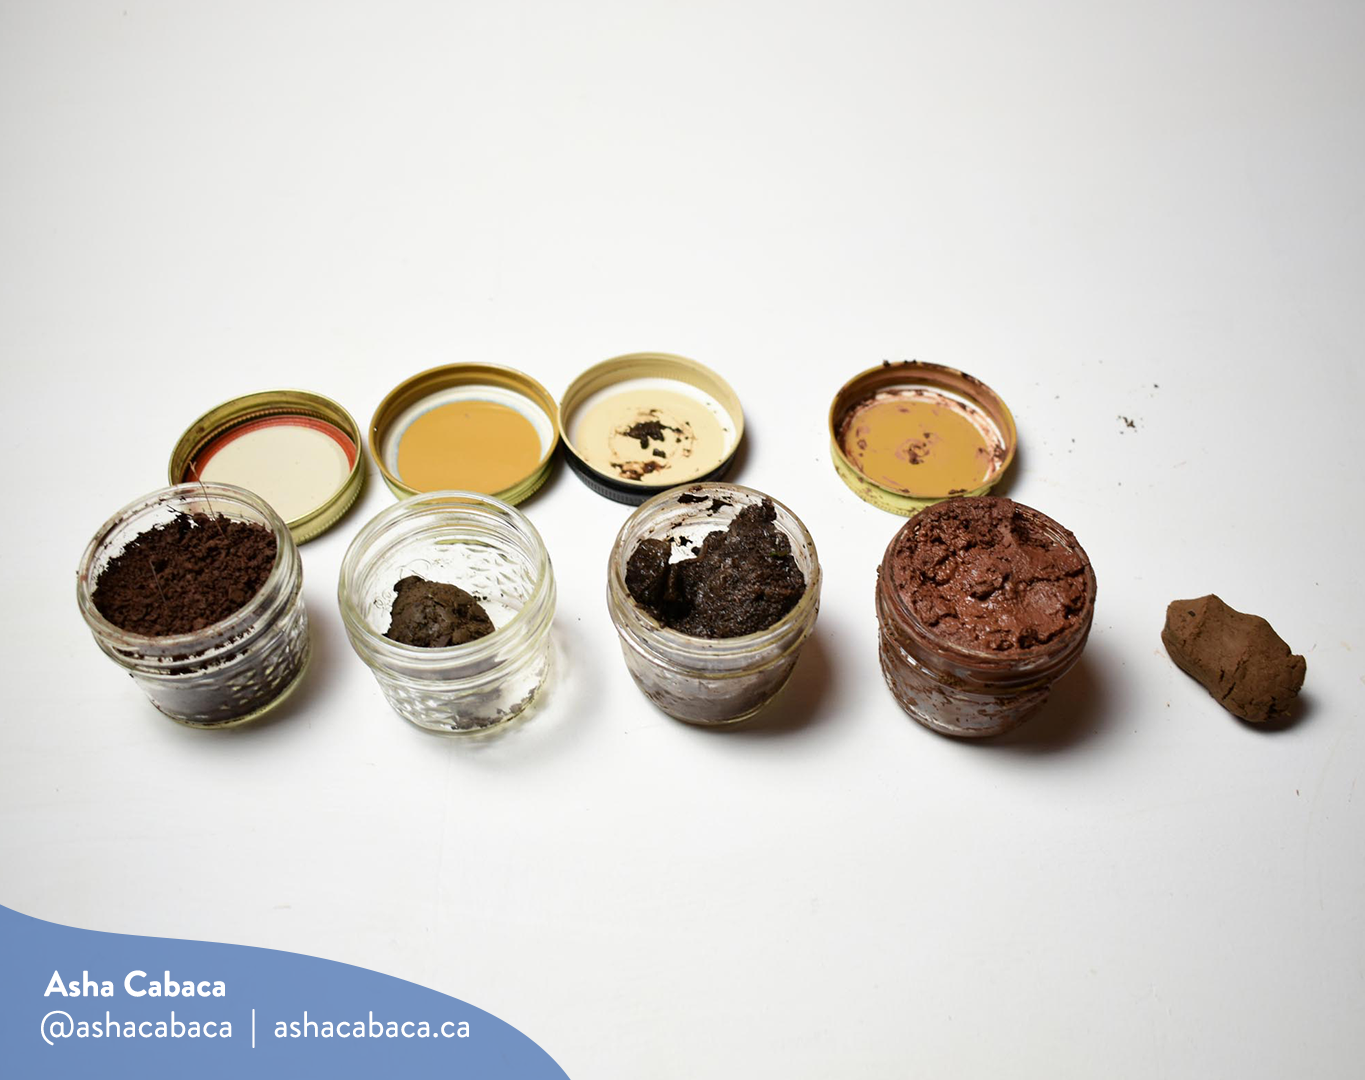 Horizontal photo of artwork by Asha Cabaca, it features four kinds of mud in four glass mason jars on a white surface. There is a watermark in blue that has Asha’s name, Instagram handle (@ashacabaca) and website (ashacabaca.ca).